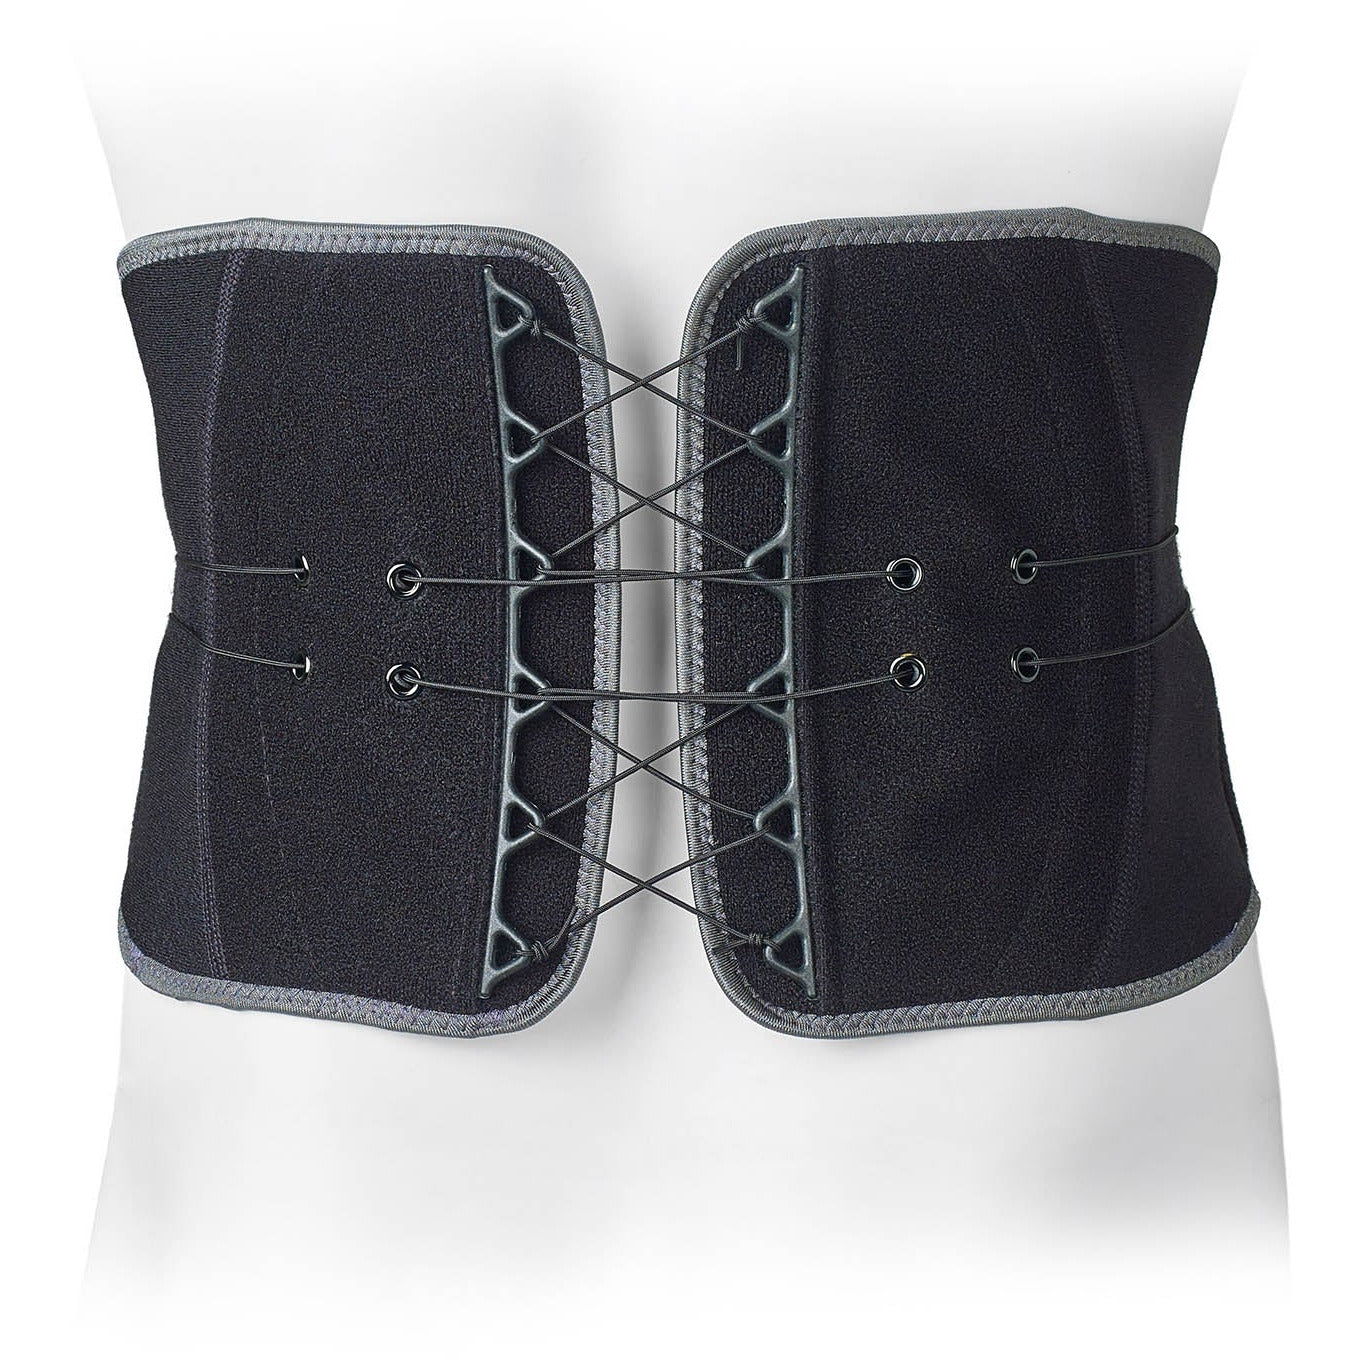 Advanced Back Support with Adjustable Tension